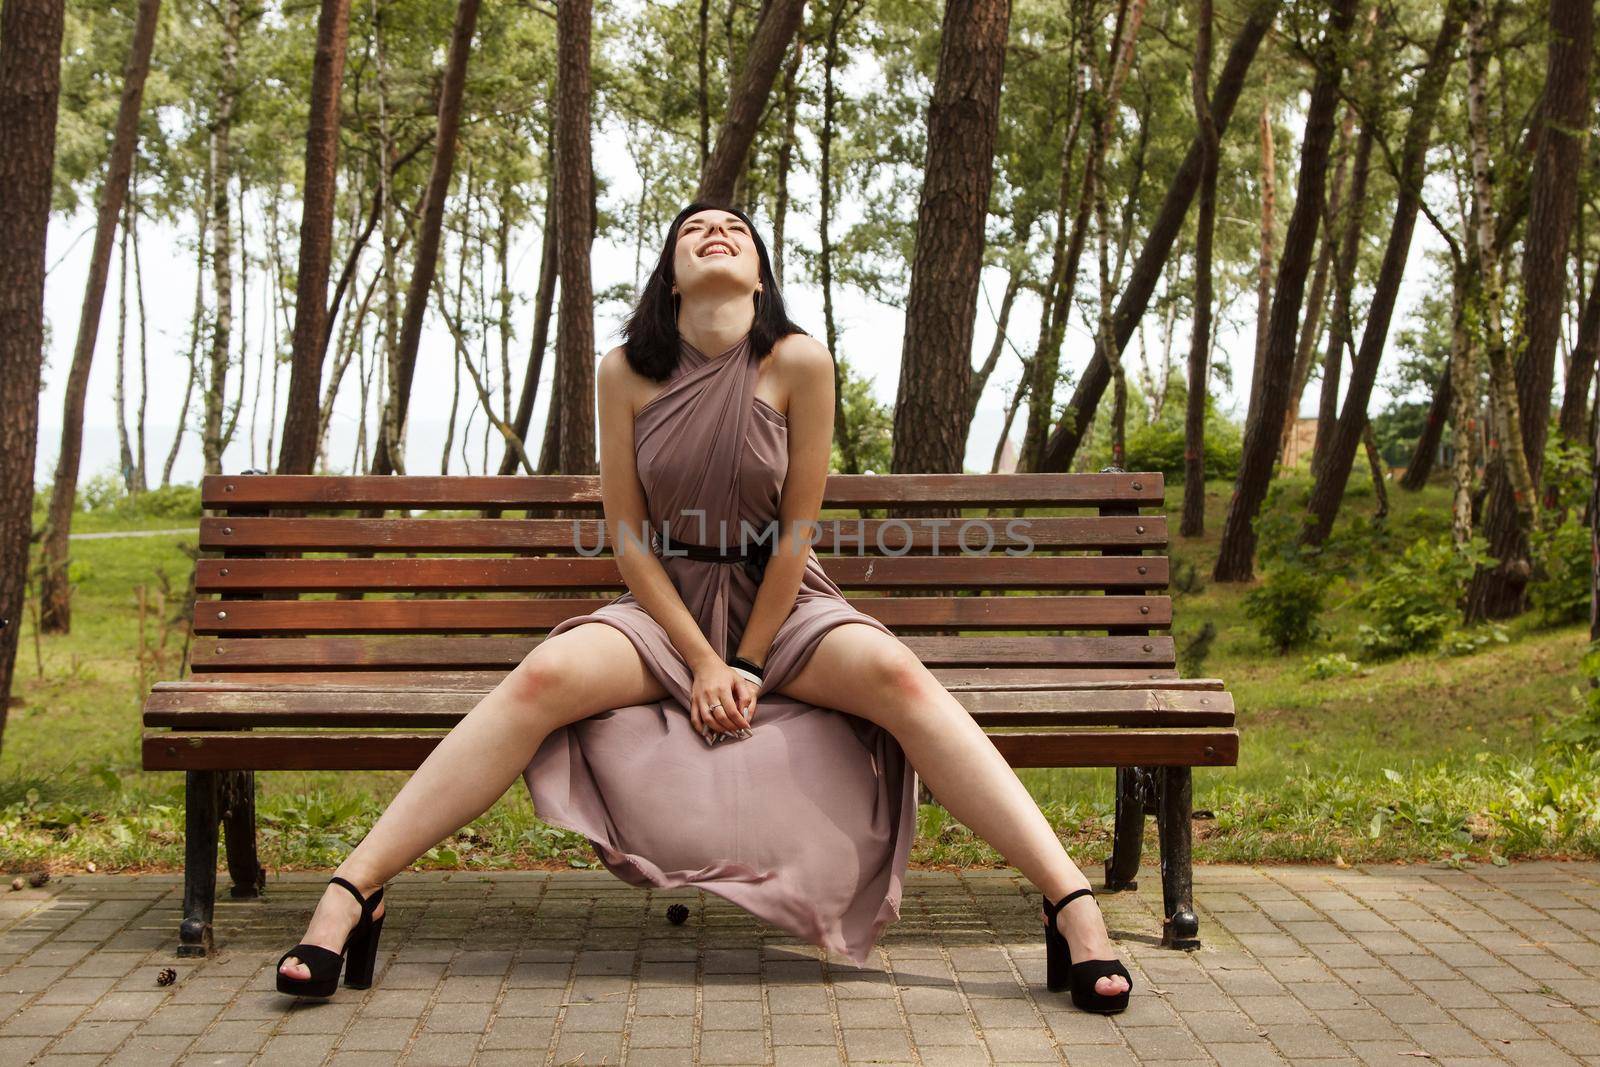 young beautiful brunette woman in beige dress sitting on a park bench on summer day